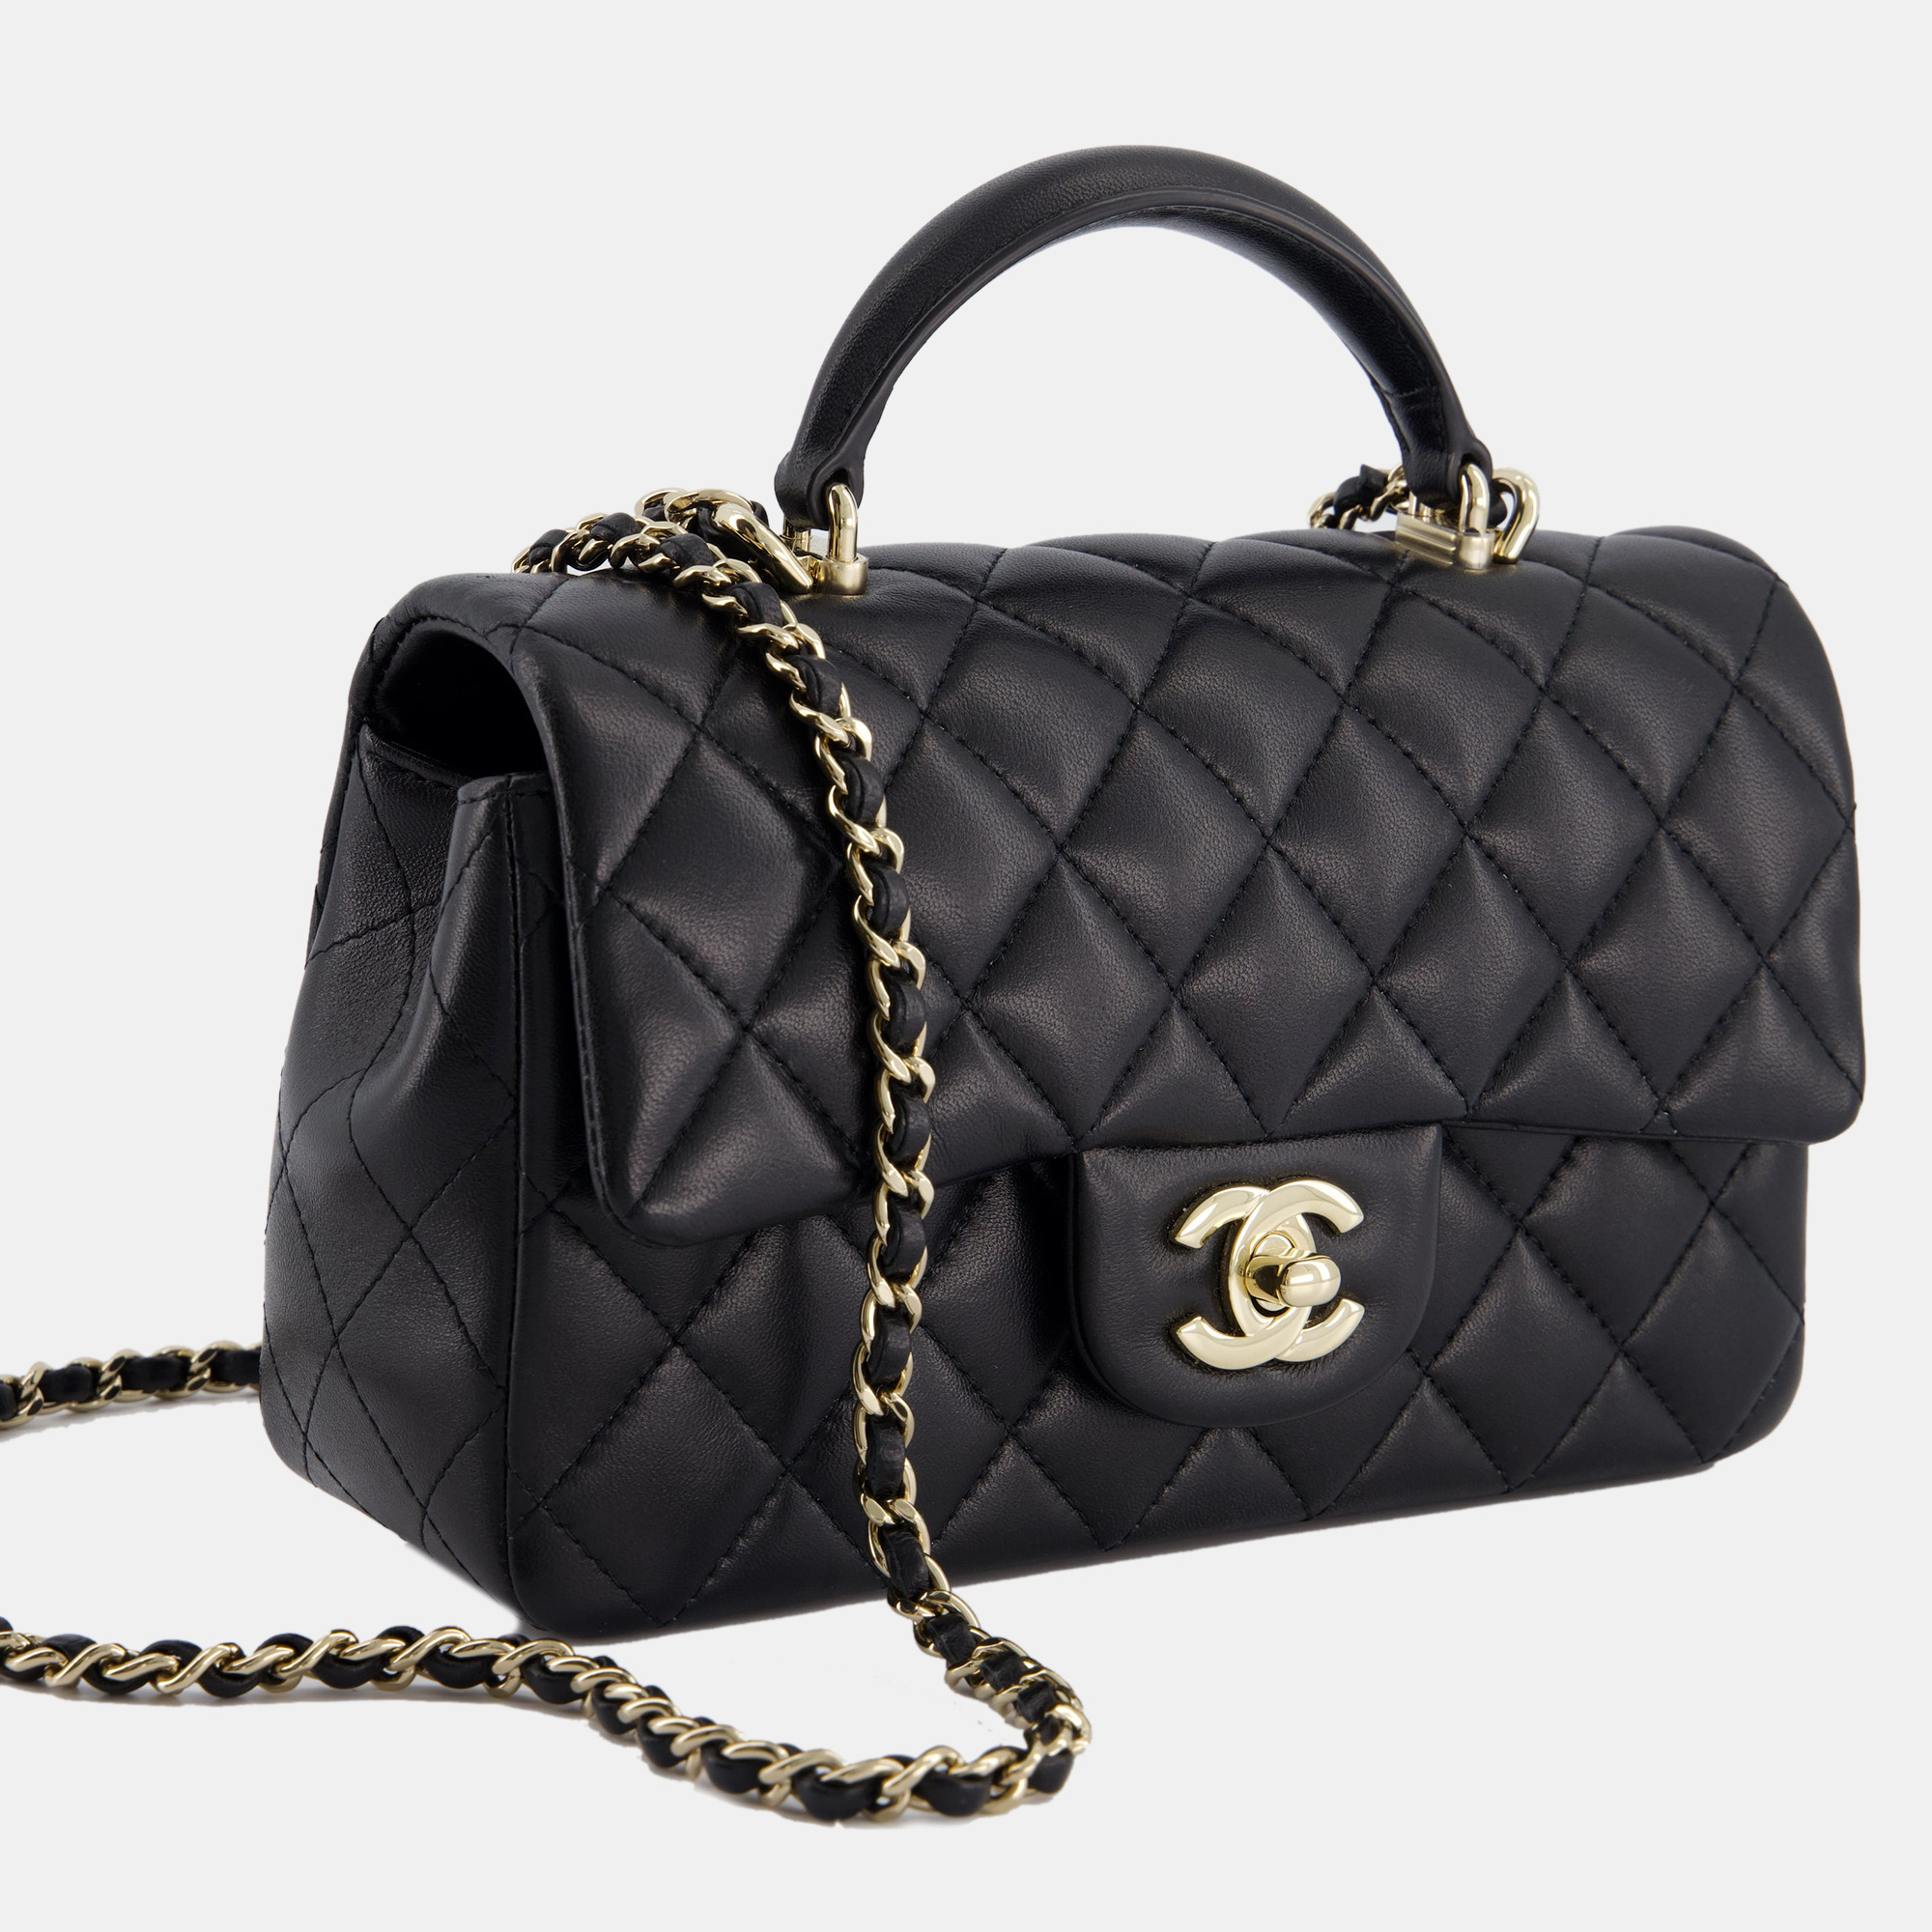 Chanel Black Mini Rectangular Top Handle Flap Bag In Lambskin With Champagne Gold Hardware